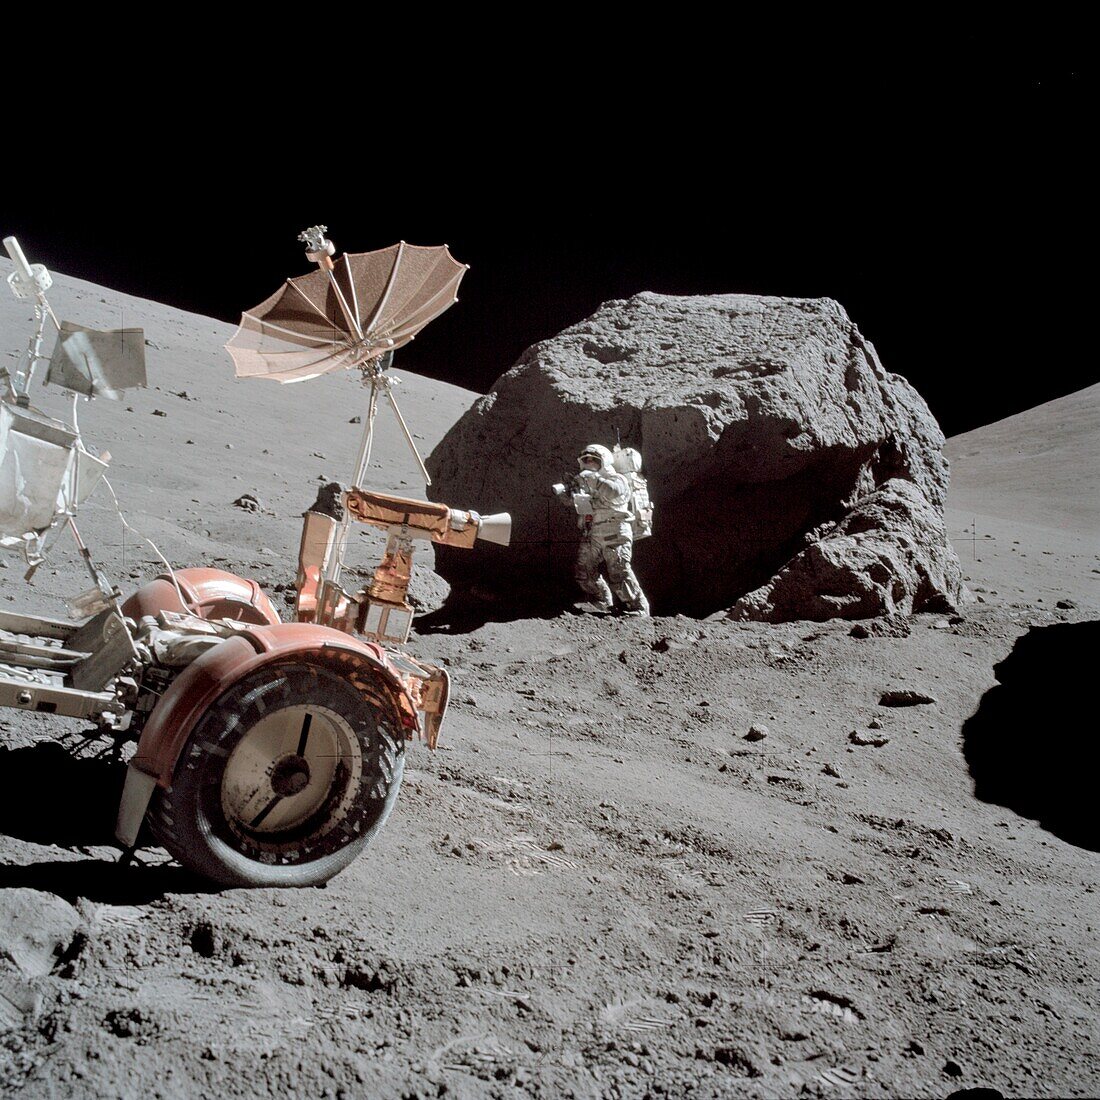 Astronaut working on the lunar surface, Apollo 17 image